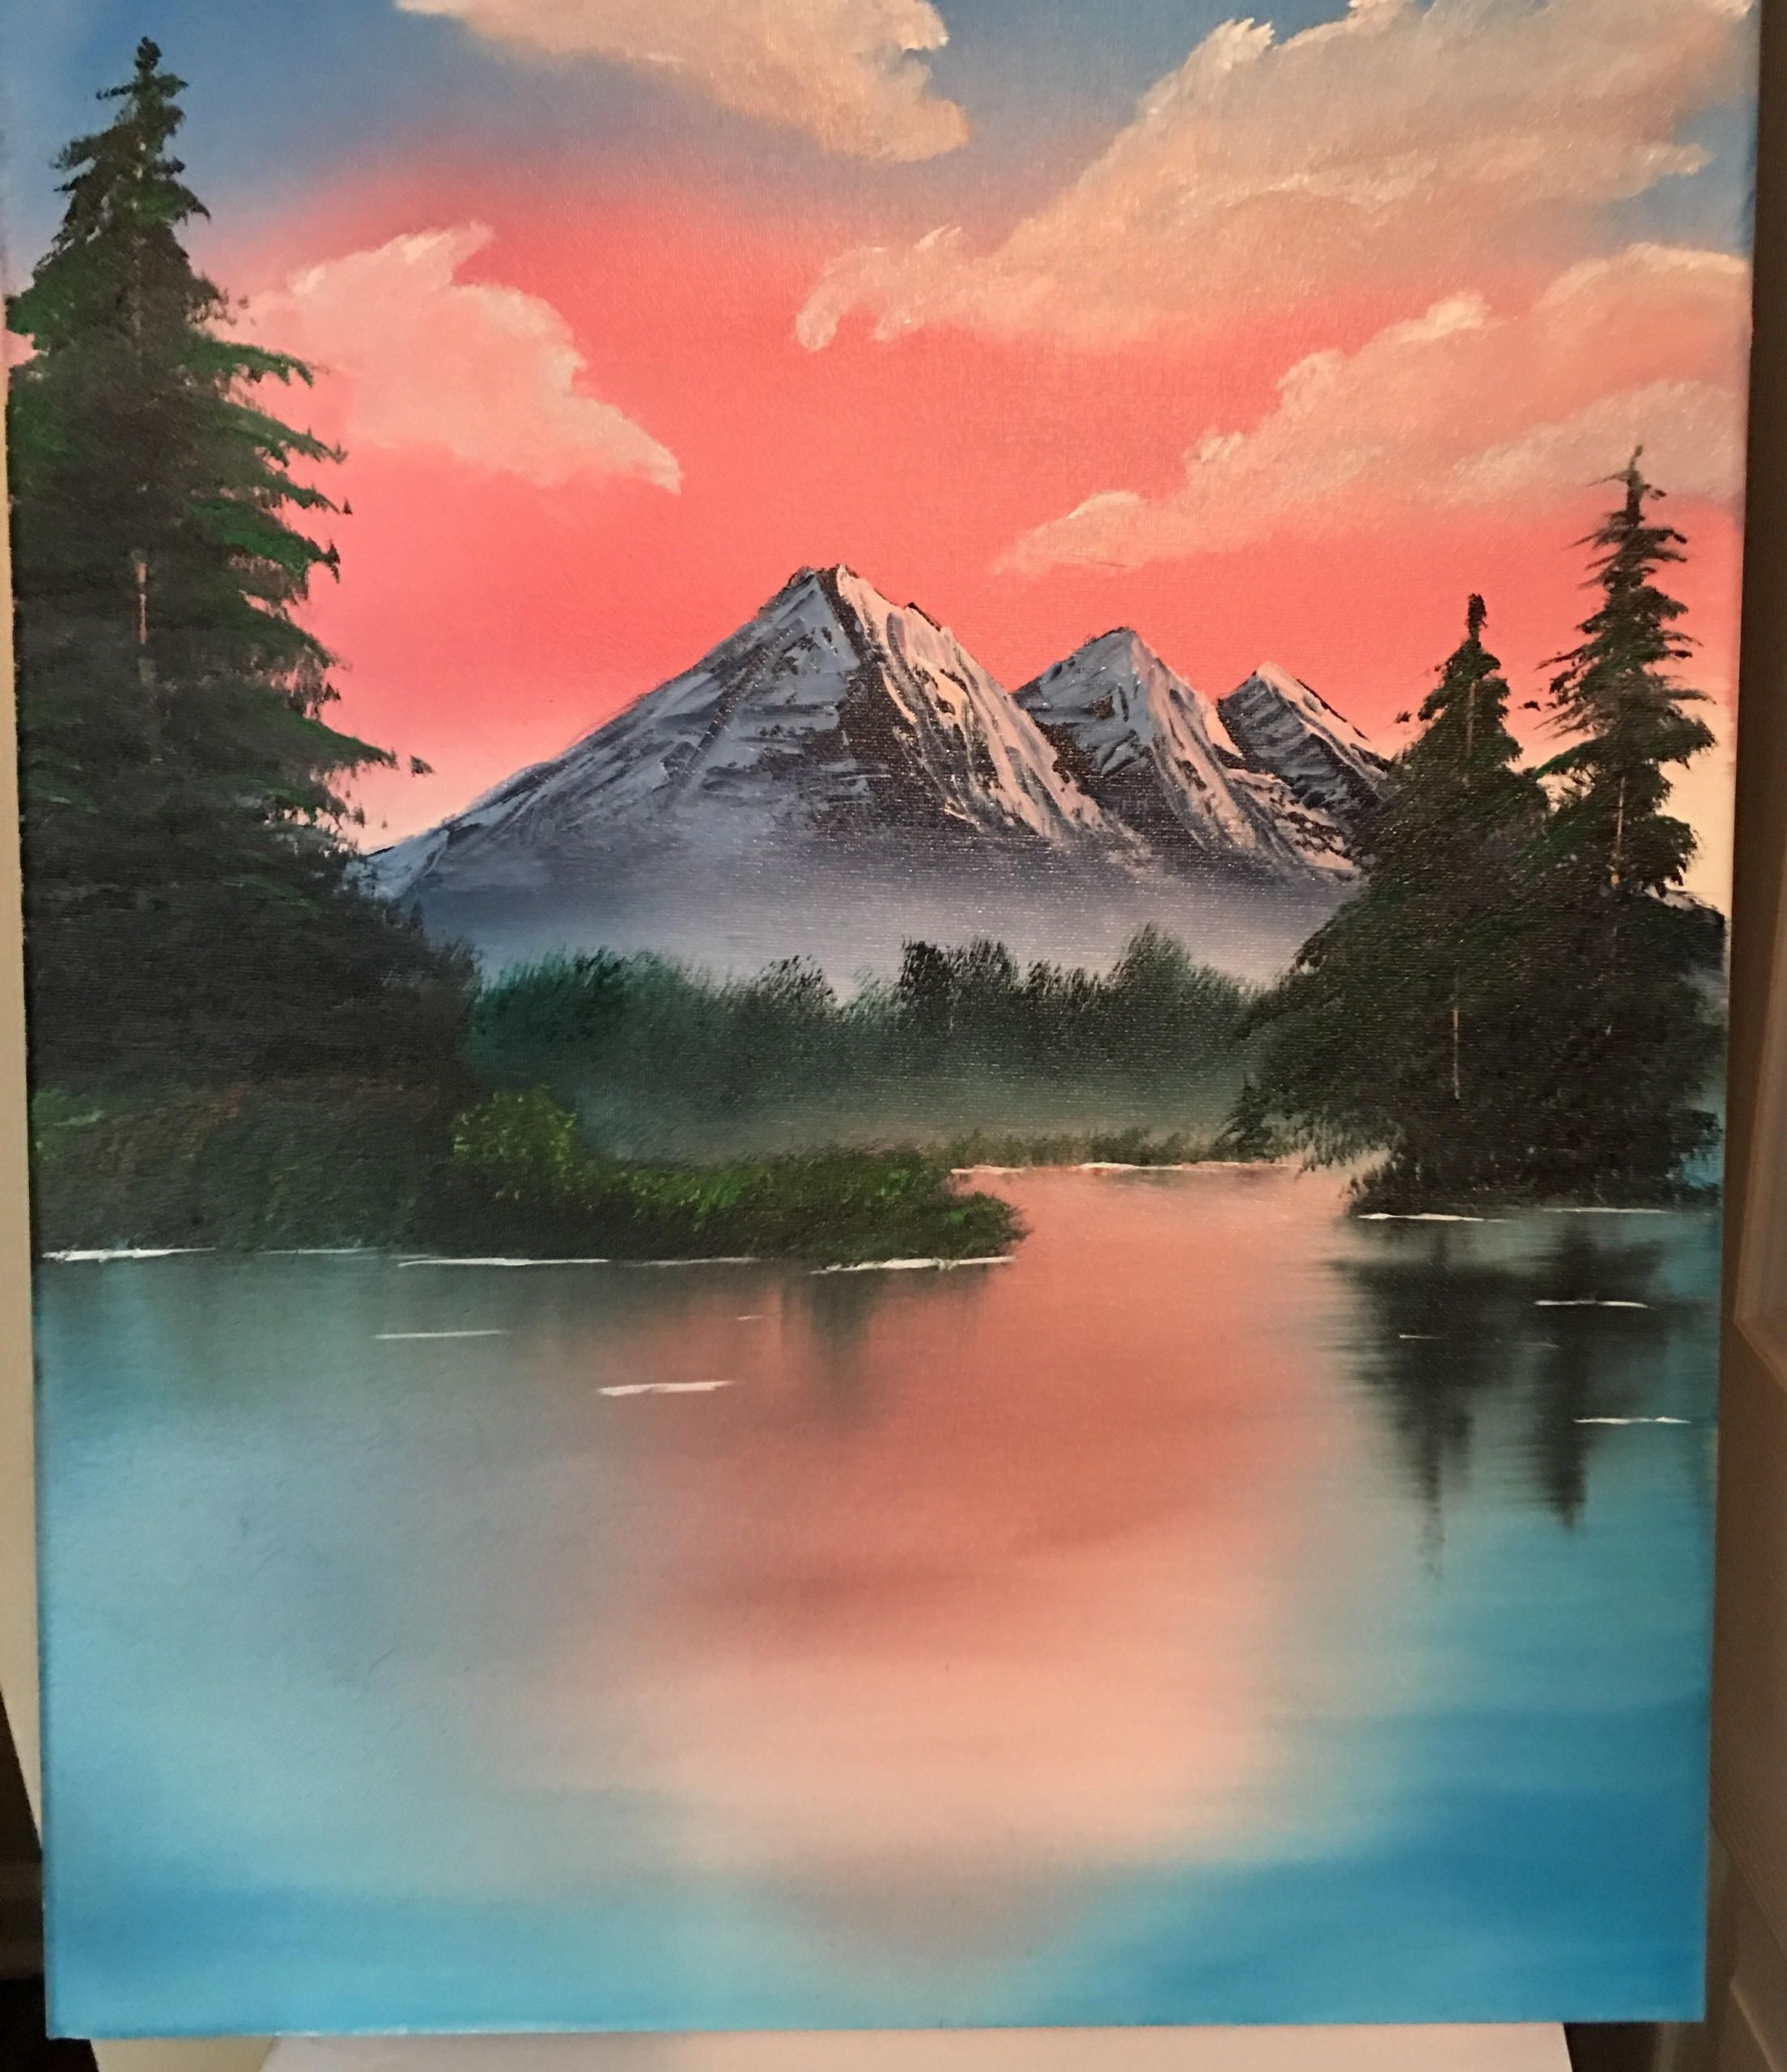 Bob Ross Landscape Paintings
 Was inspired by this sub to attempt my 1st Bob Ross